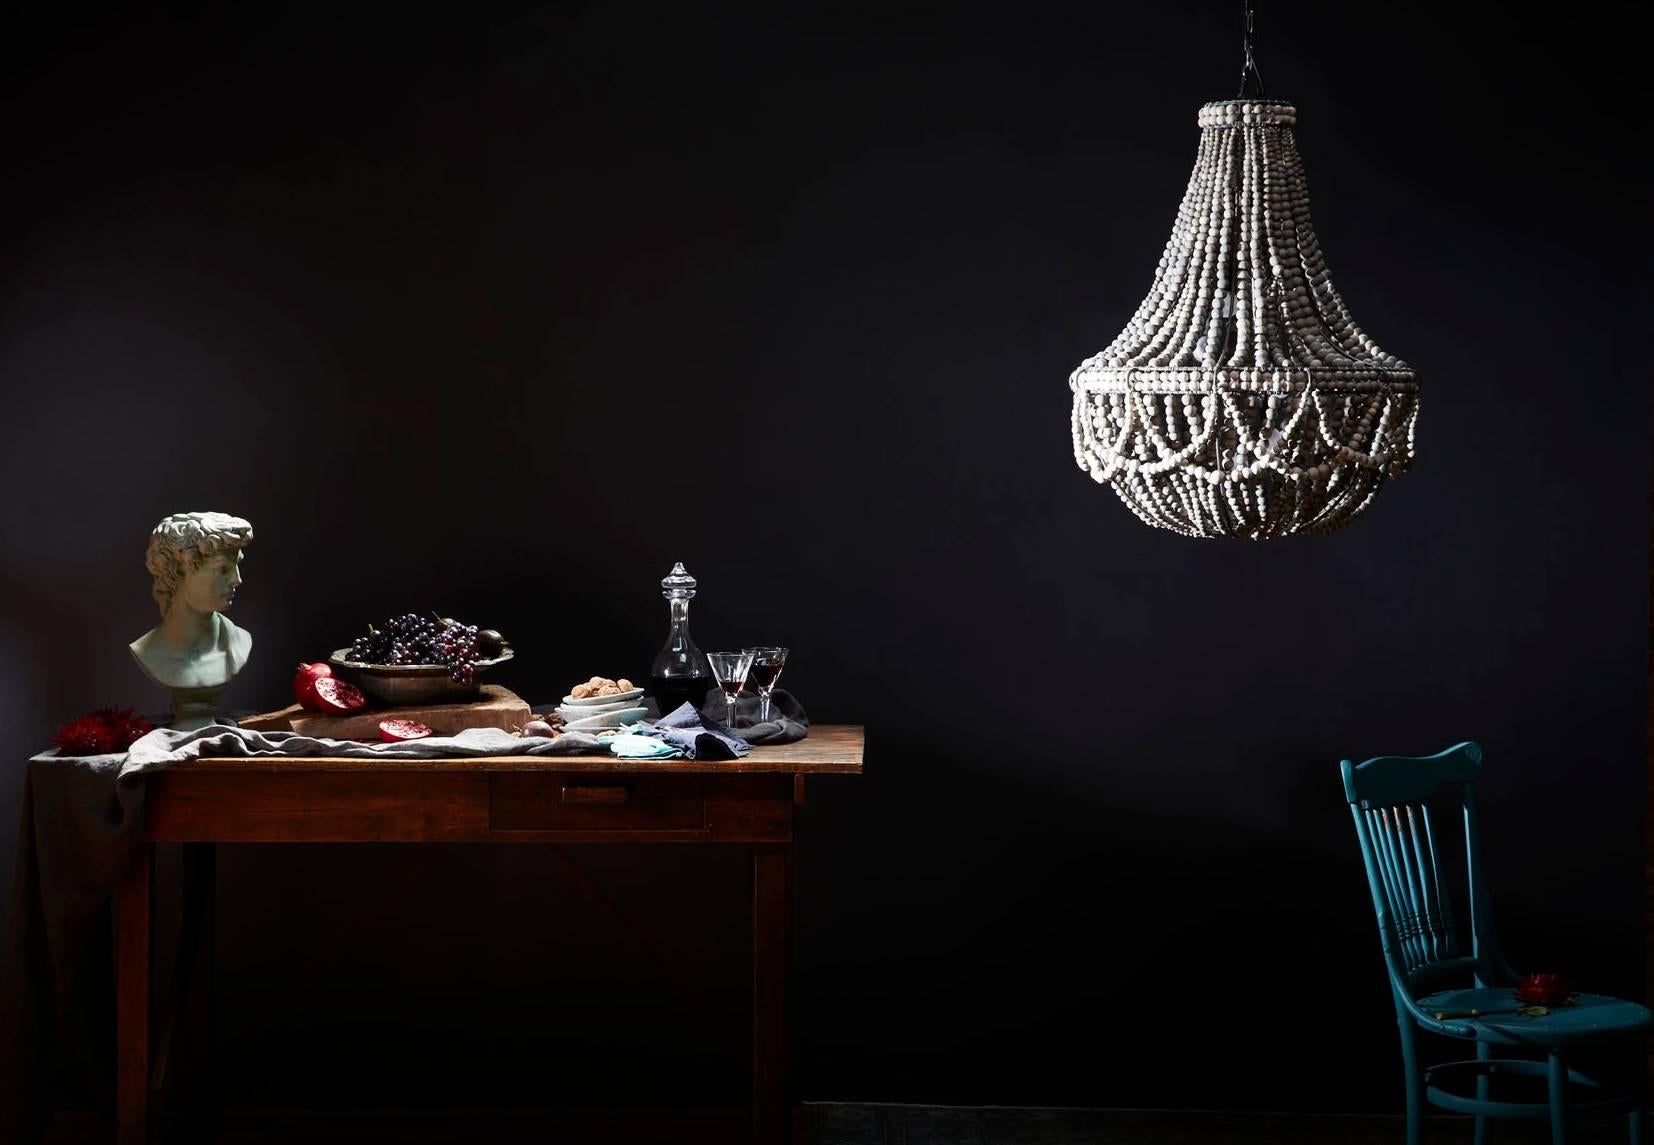 The klaylife chandelier that just oozes charm.

There’s something about the Frill pendant that clay beaded lighting enthusiasts just love. Perhaps it’s the modern, minimal chandelier design or the overlapping side swags. Regardless, this beaded